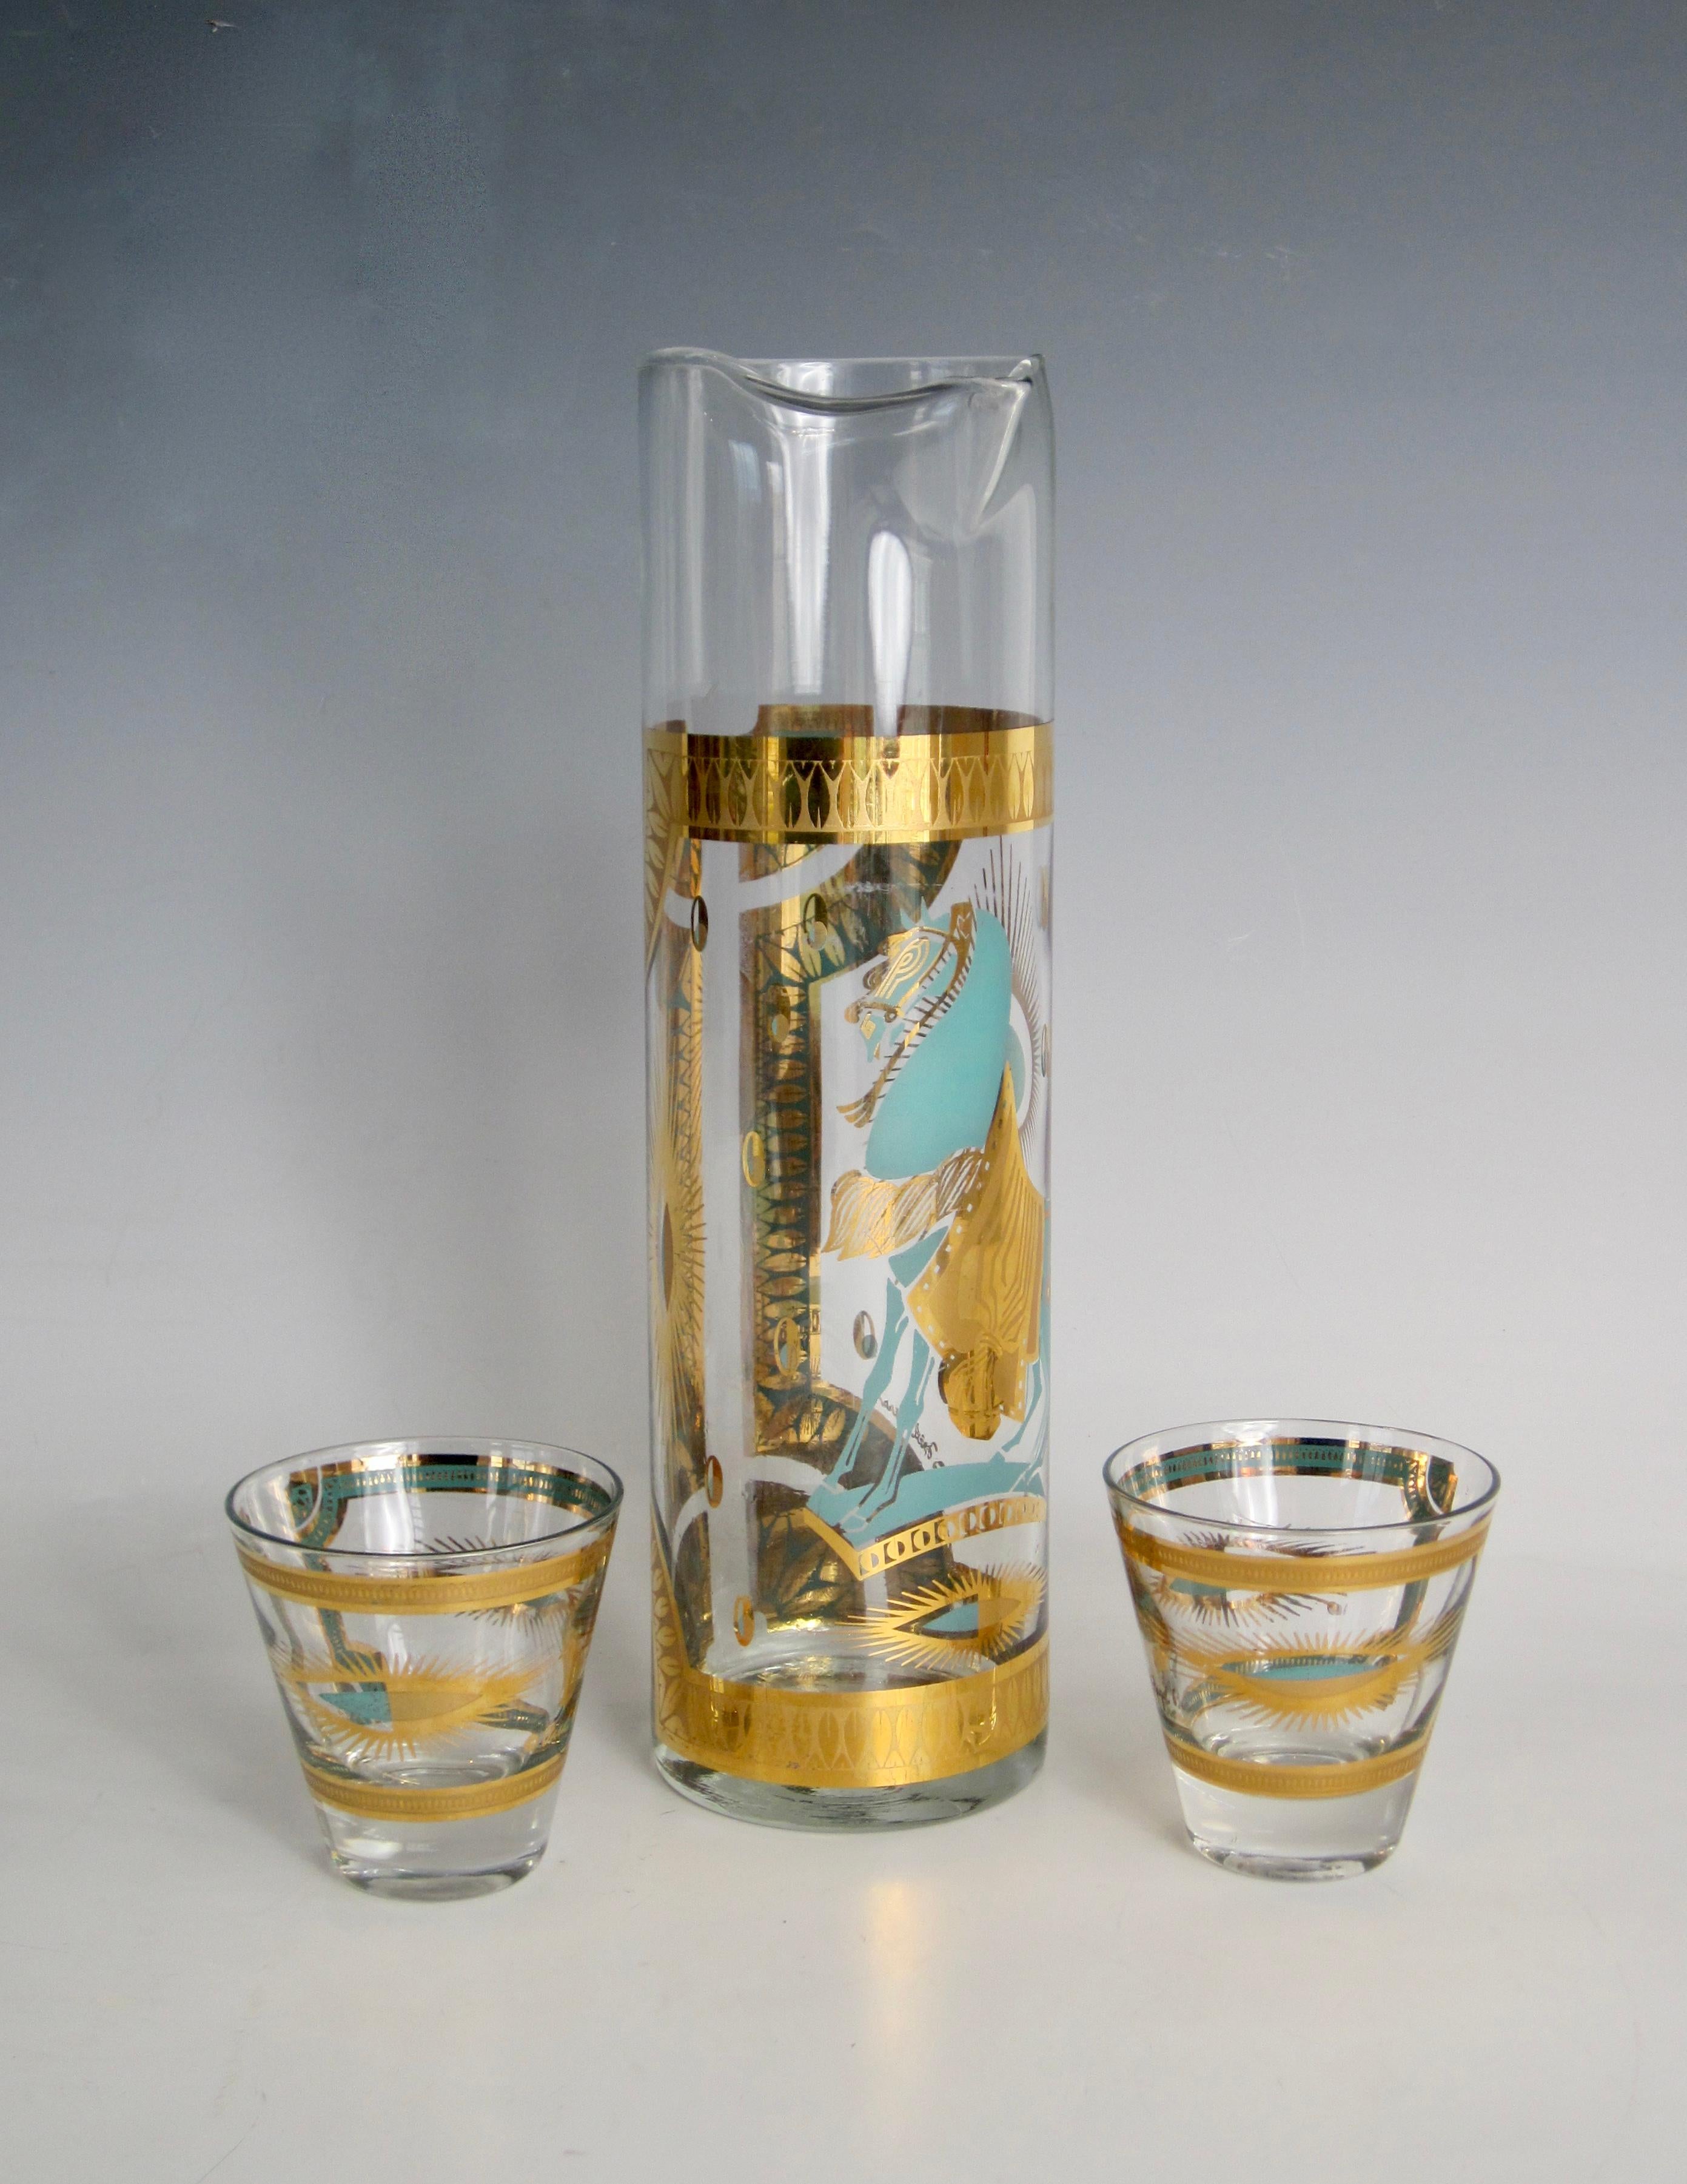 Three piece Fred Press barware set - cocktail pitcher and two rocks glasses-  with trojan horse and starbursts in teal and 22k gold.

As the chief designer and executive Vice President of Rubel & Company in New York City from the 1950-1980's, Fred